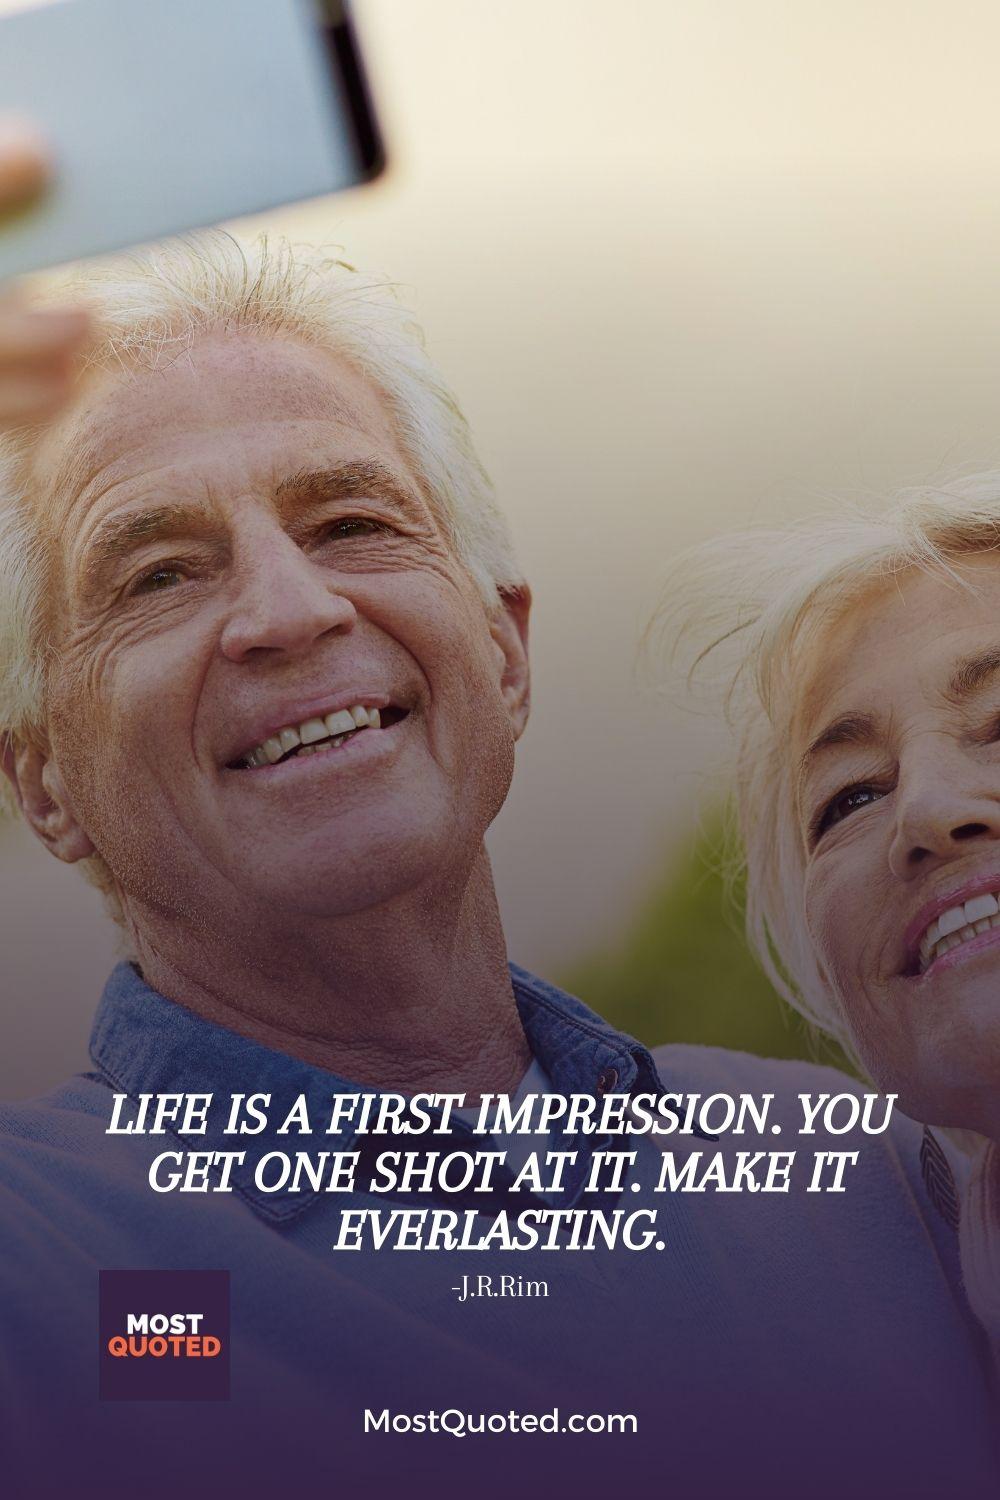 Life is a first impression. You get one shot at it. Make it everlasting.